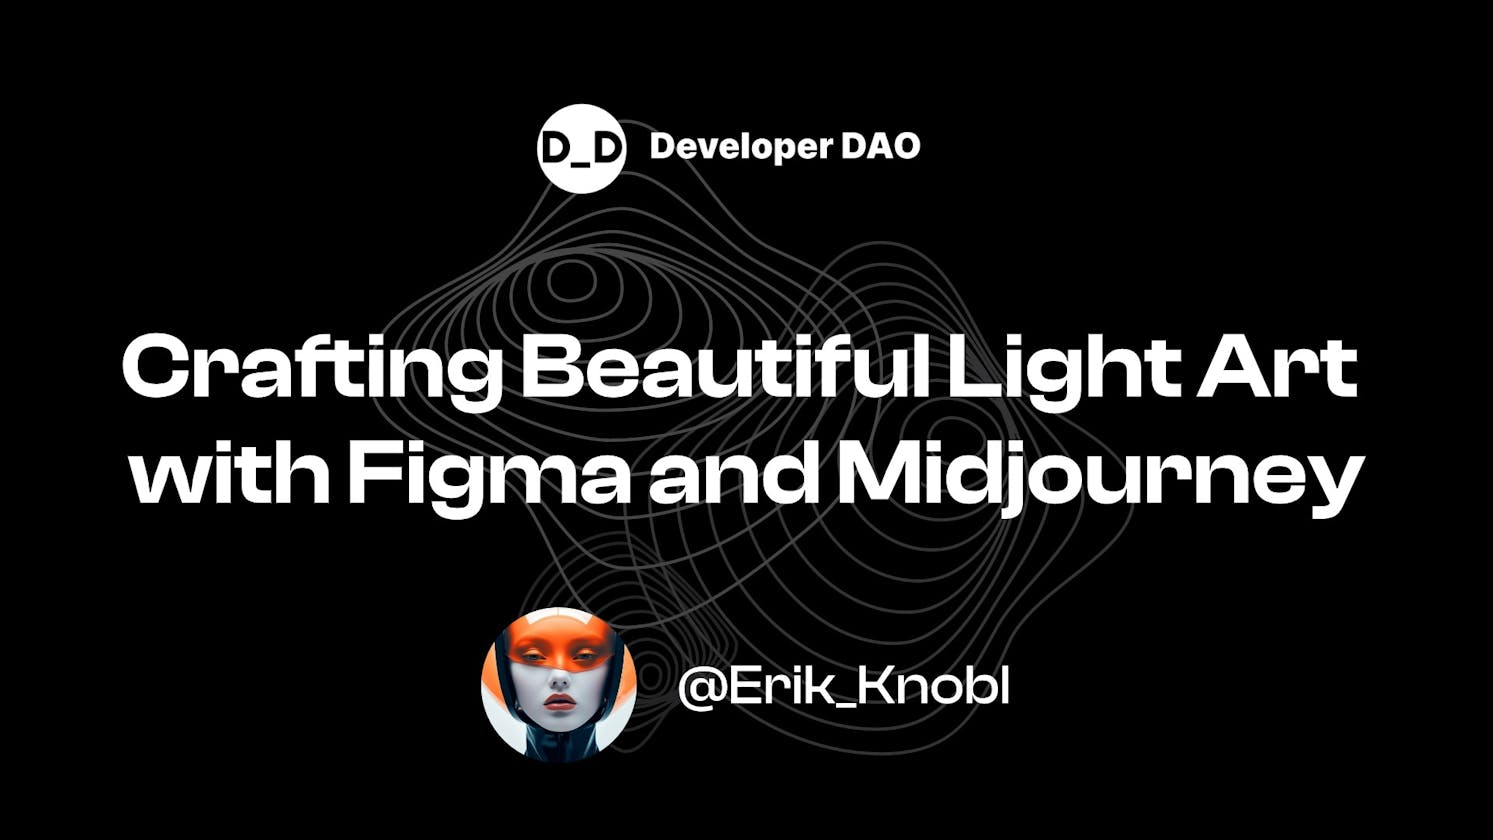 Crafting Beautiful Light Art with Figma and Midjourney